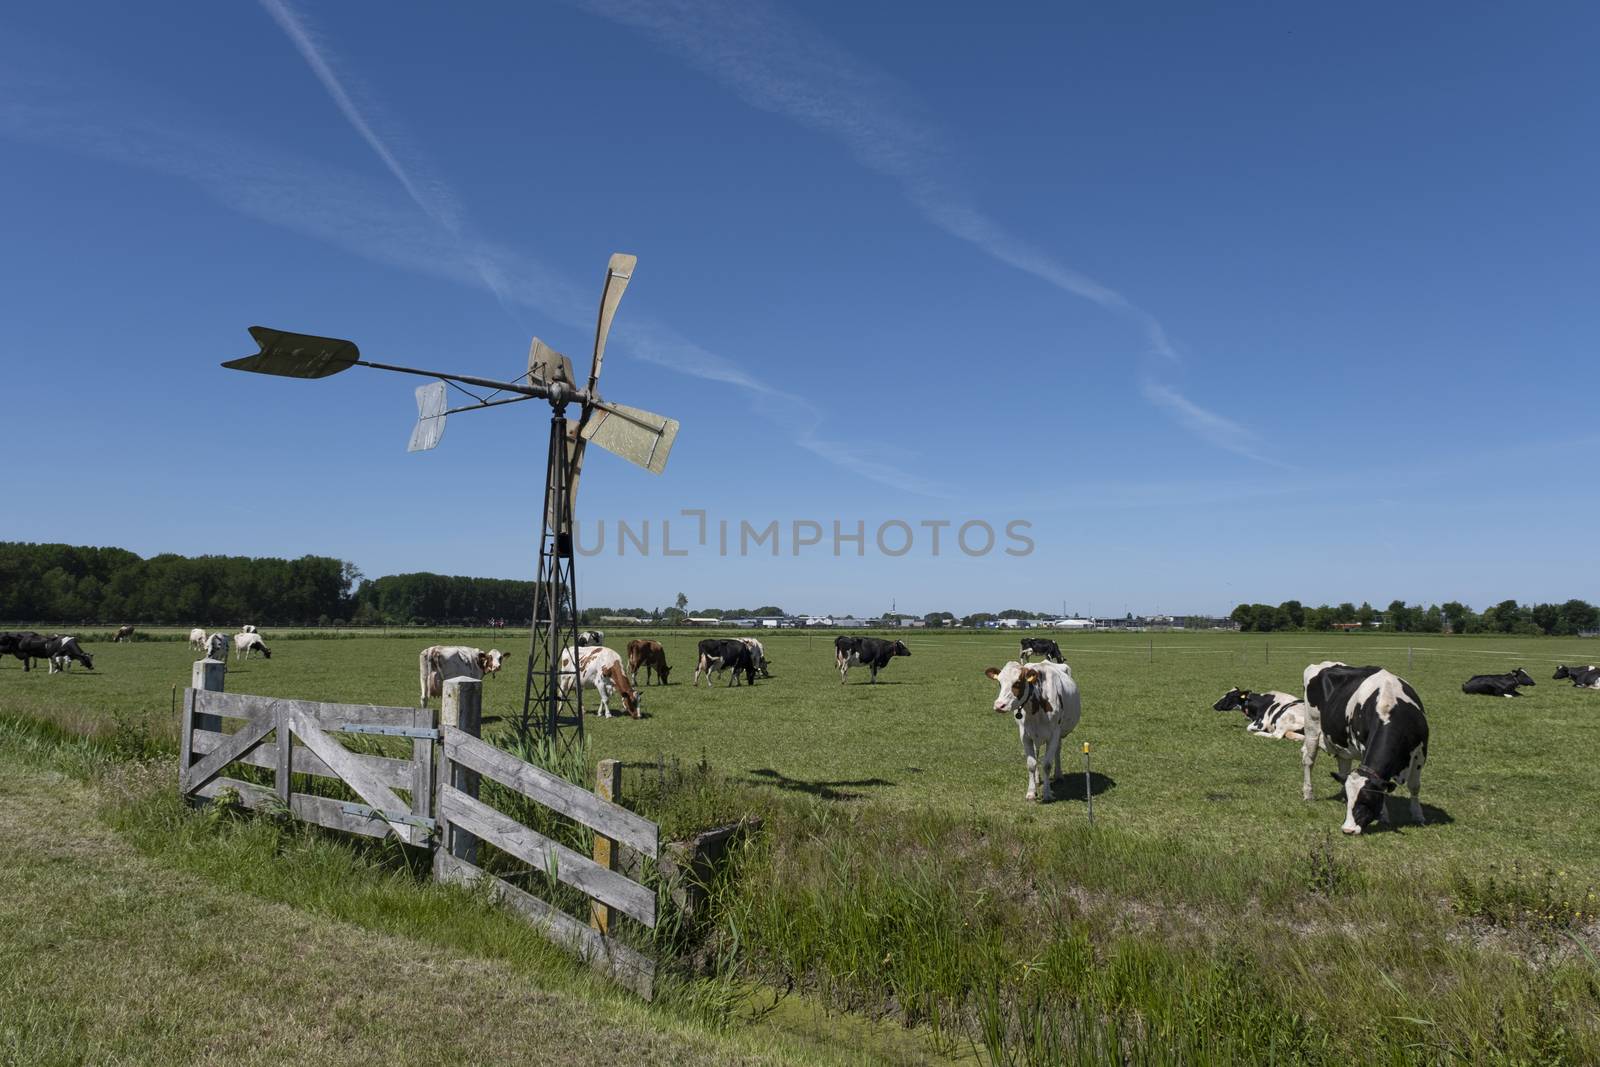 Simple metal windmill with four angled vanes curved into the wind stands on strong tall legs against a clear blue sky. The structure, rusty and chained, sits on a rural farm